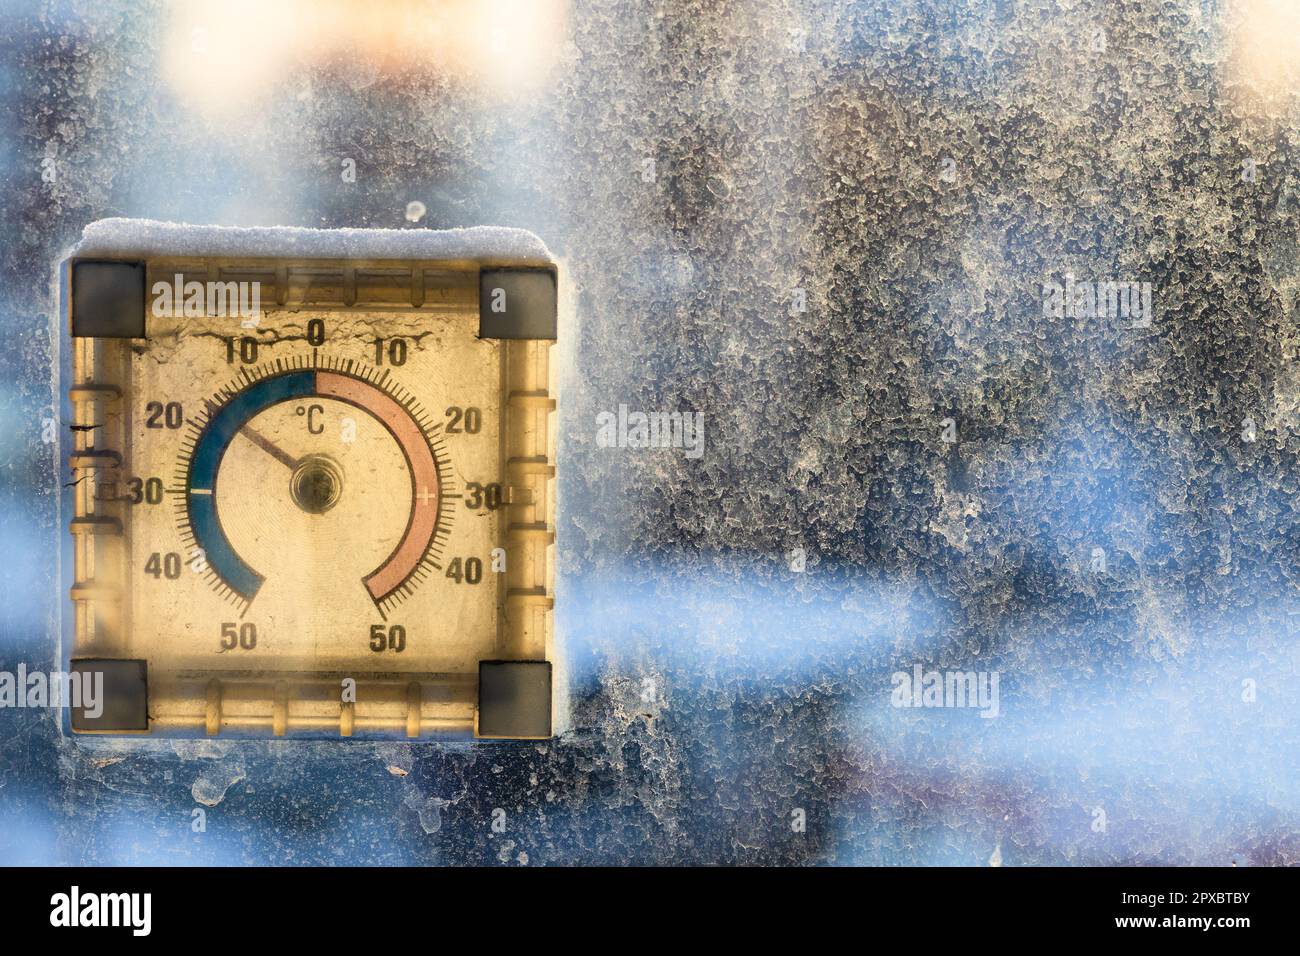 https://c8.alamy.com/comp/2PXBTBY/frost-minus-17-degrees-celsius-on-outdoor-home-window-thermometer-illuminated-by-sunlight-on-winter-morning-in-city-2PXBTBY.jpg